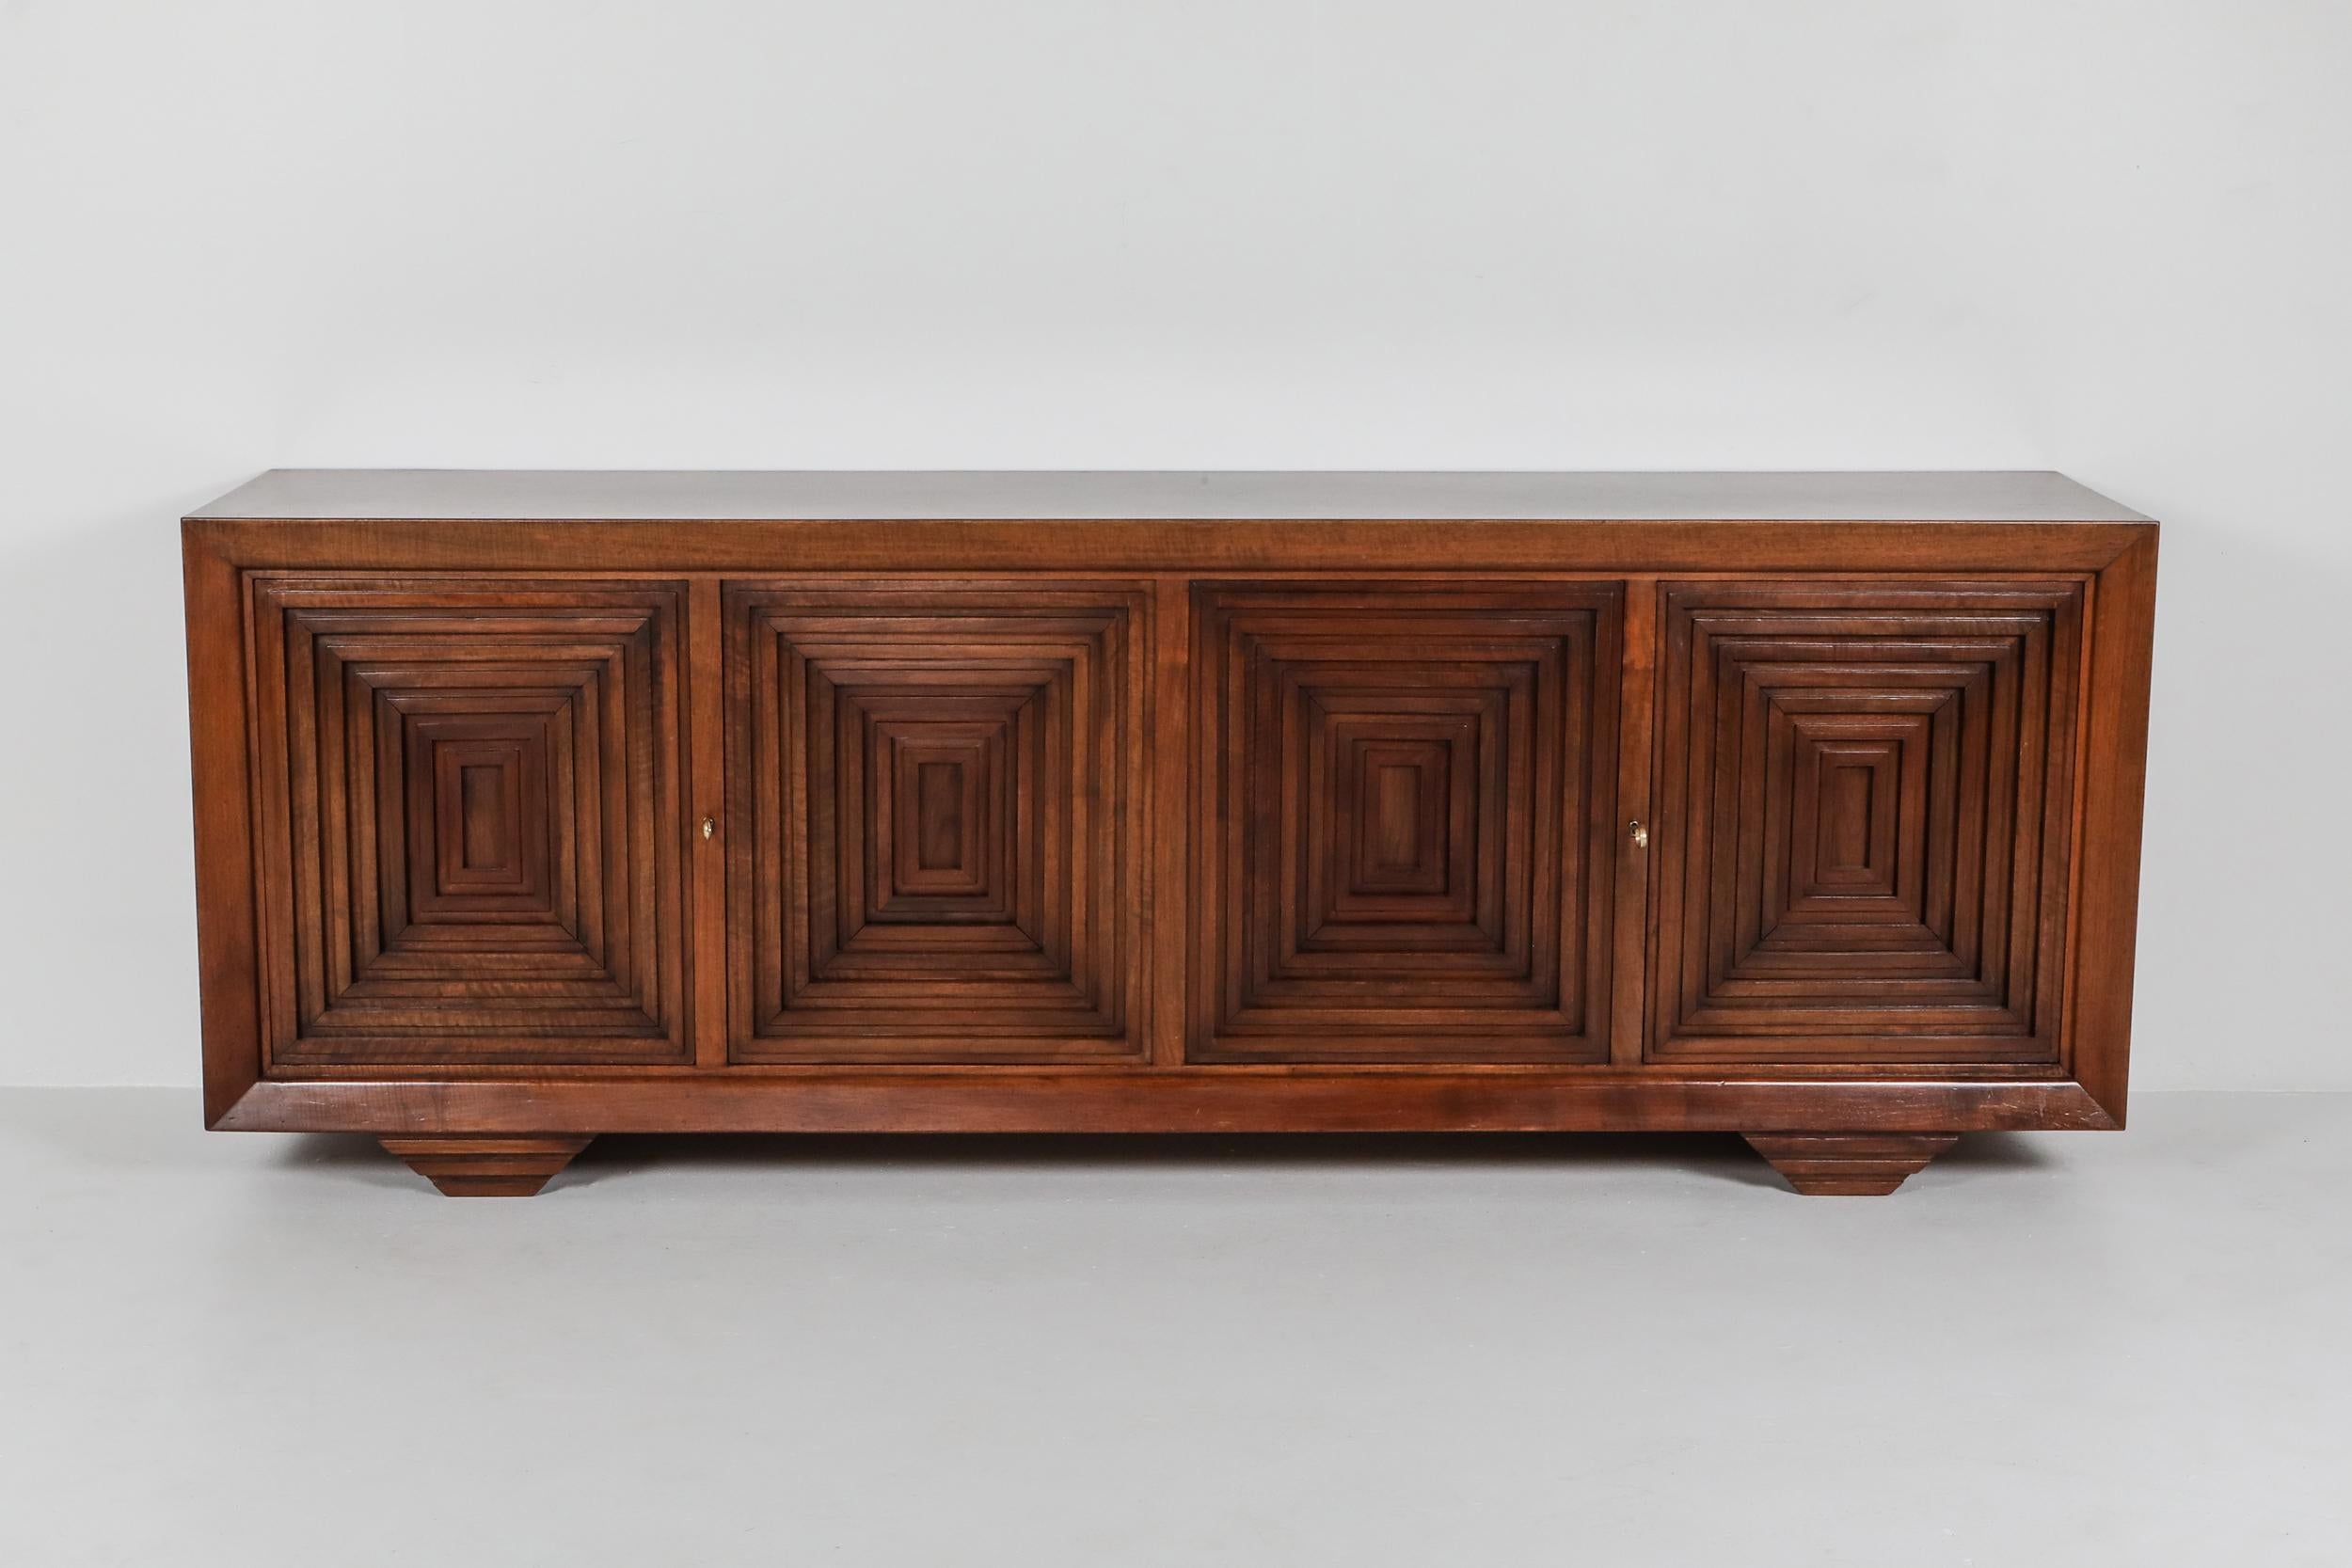 Carlo Scarpa, sideboard, solid walnut and walnut veneer, mid-century modern, brutalist

Similar to his architectural masterpiece, the Brion Vega cemetery, he uses graphical lines and contrasting depths into his work, like a never-ending